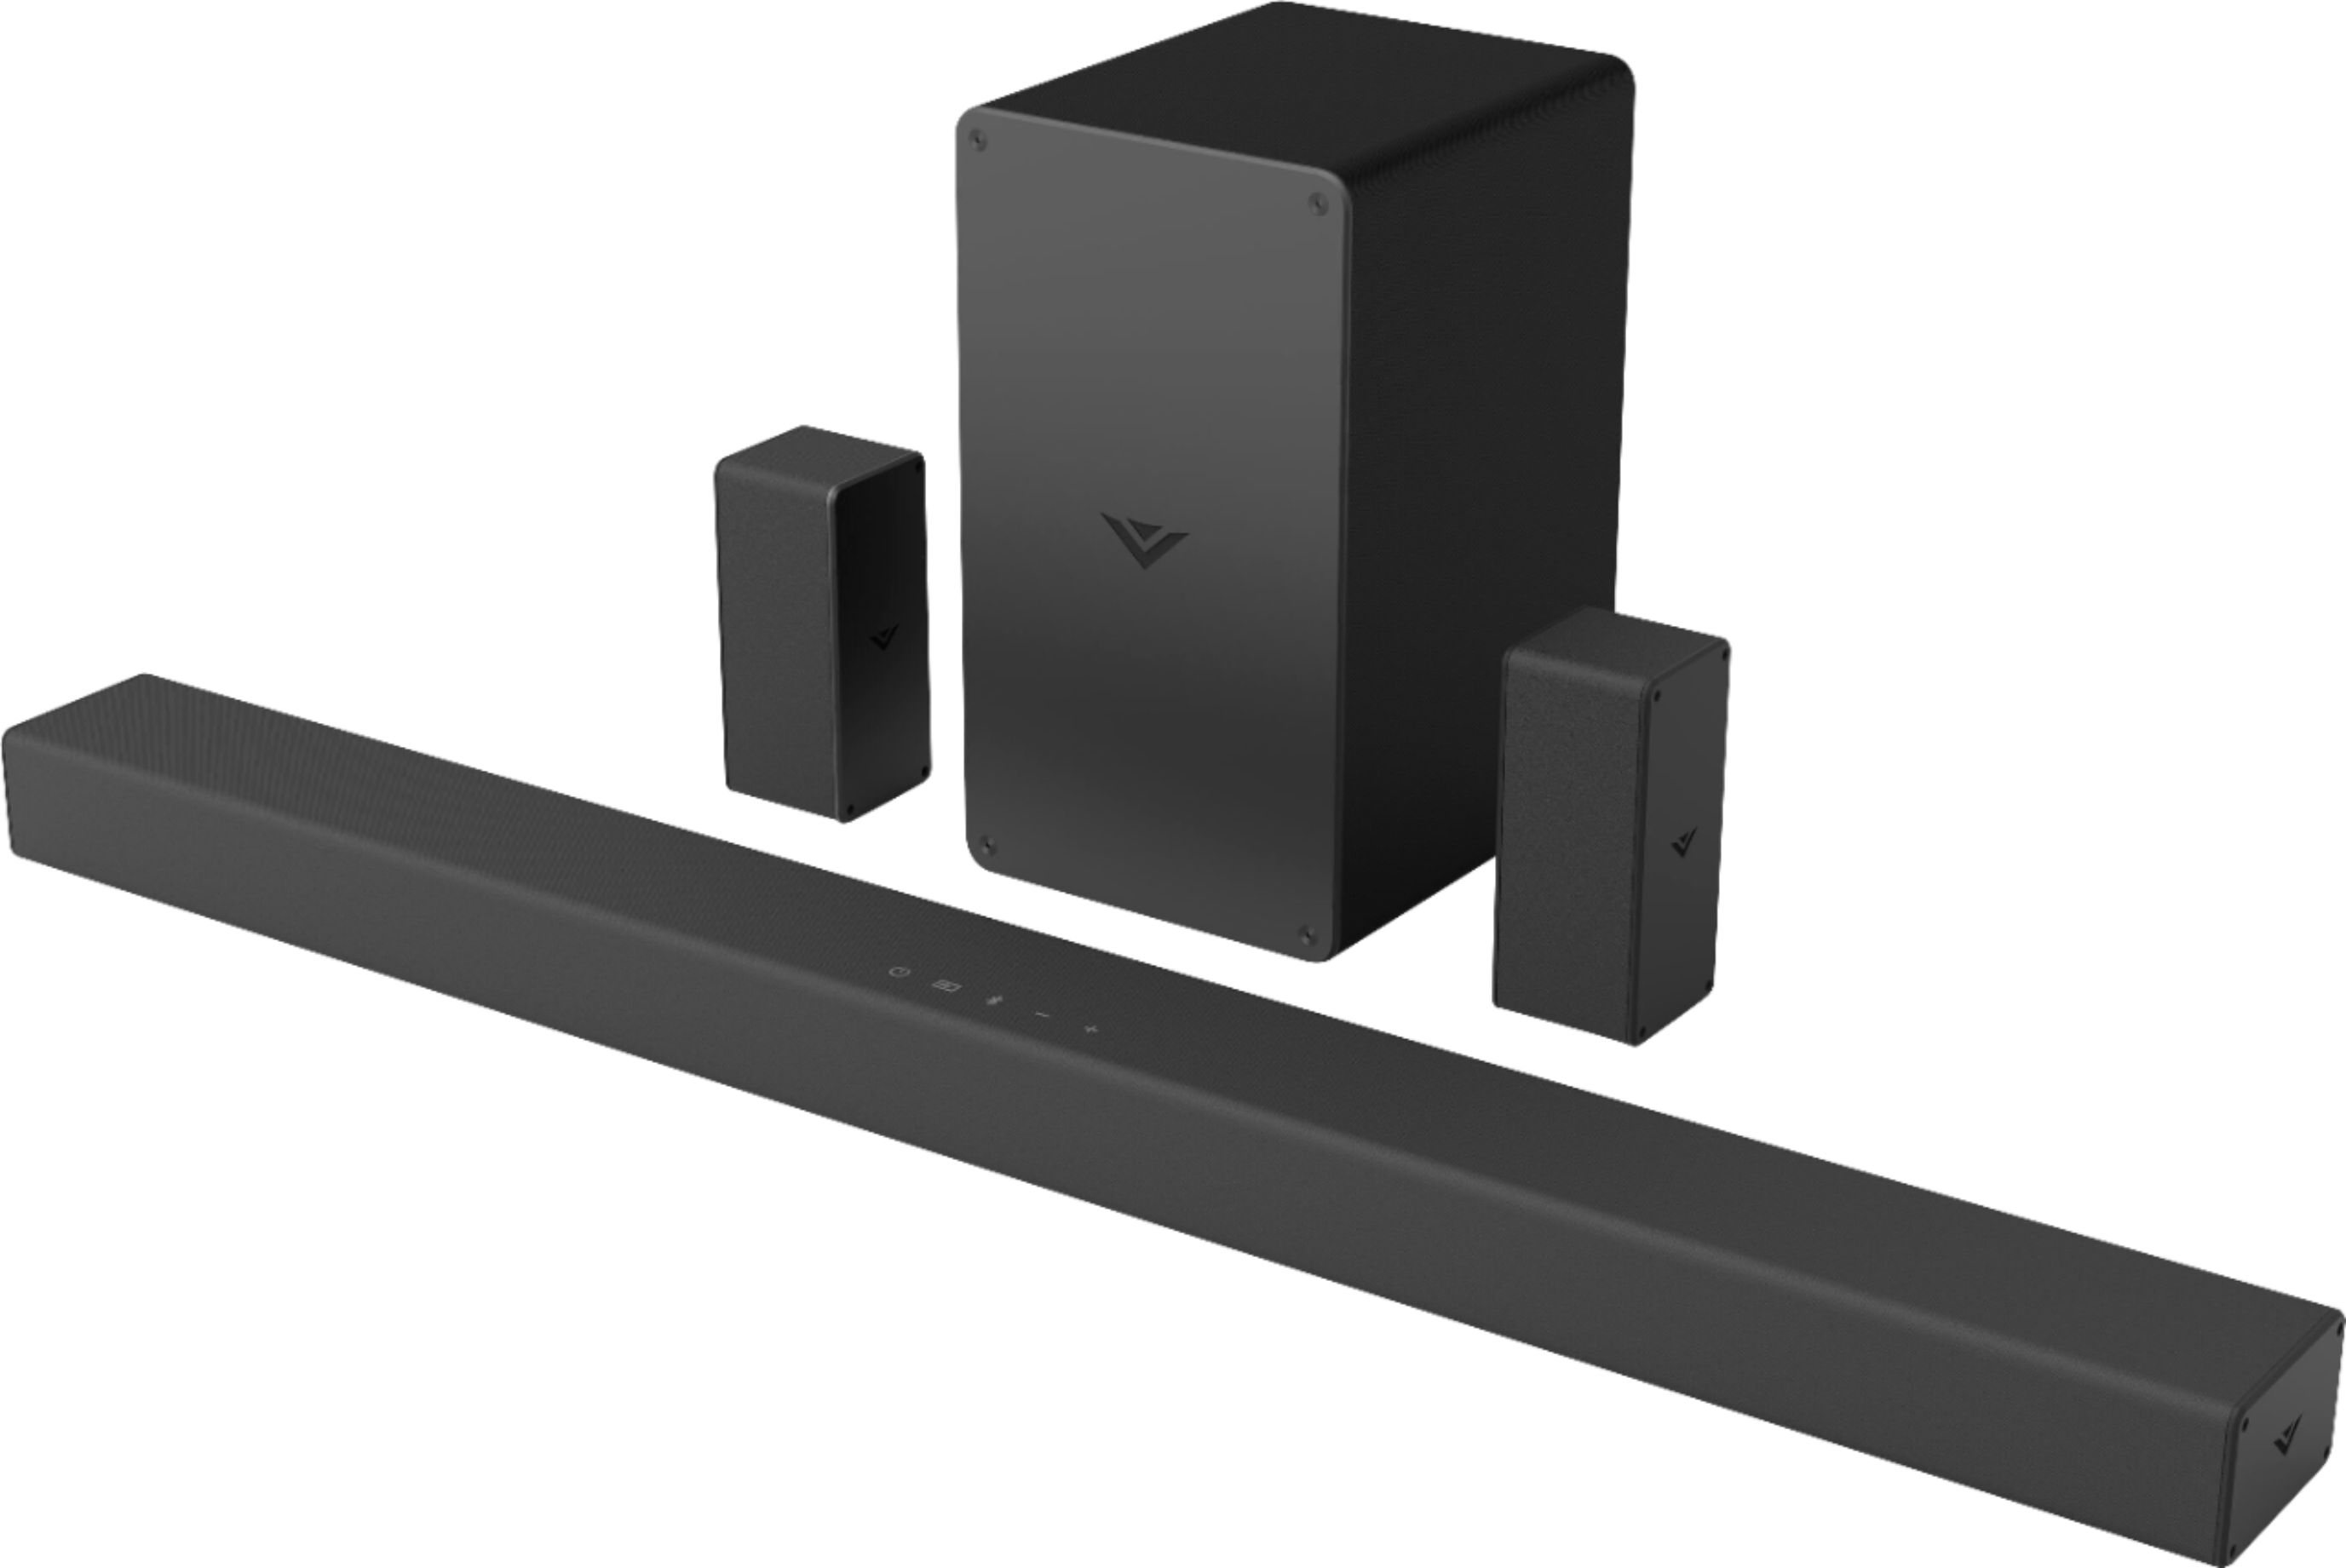 Angle View: VIZIO - 5.1-Channel Sound Bar with Wireless Subwoofer and DTS Virtual:X - Dark Charcoal